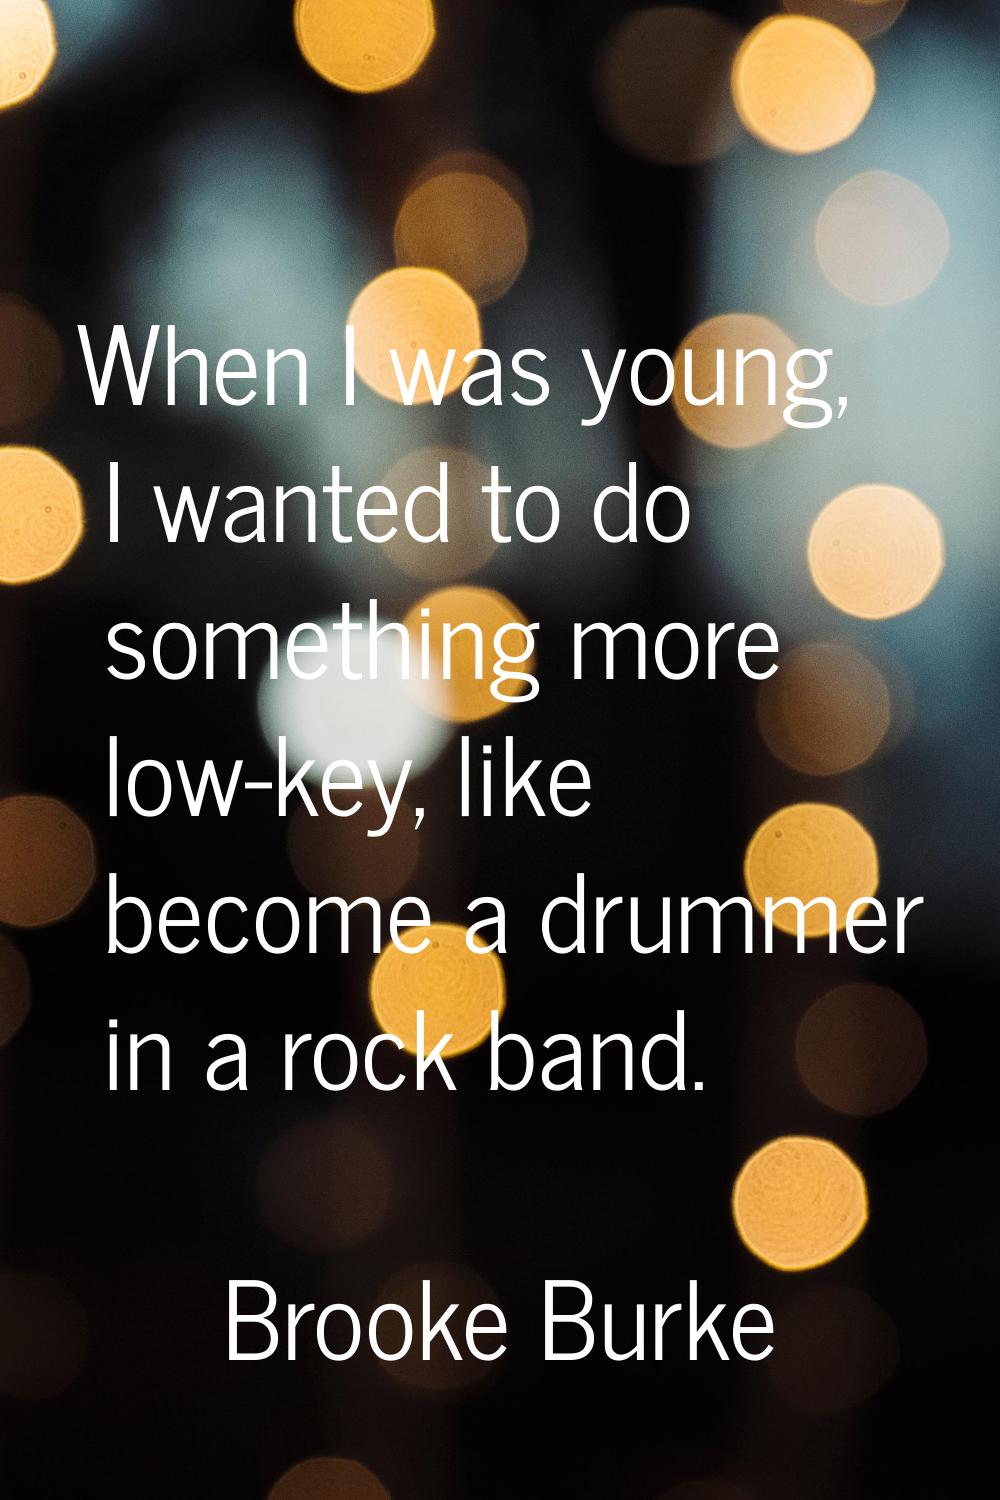 When I was young, I wanted to do something more low-key, like become a drummer in a rock band.